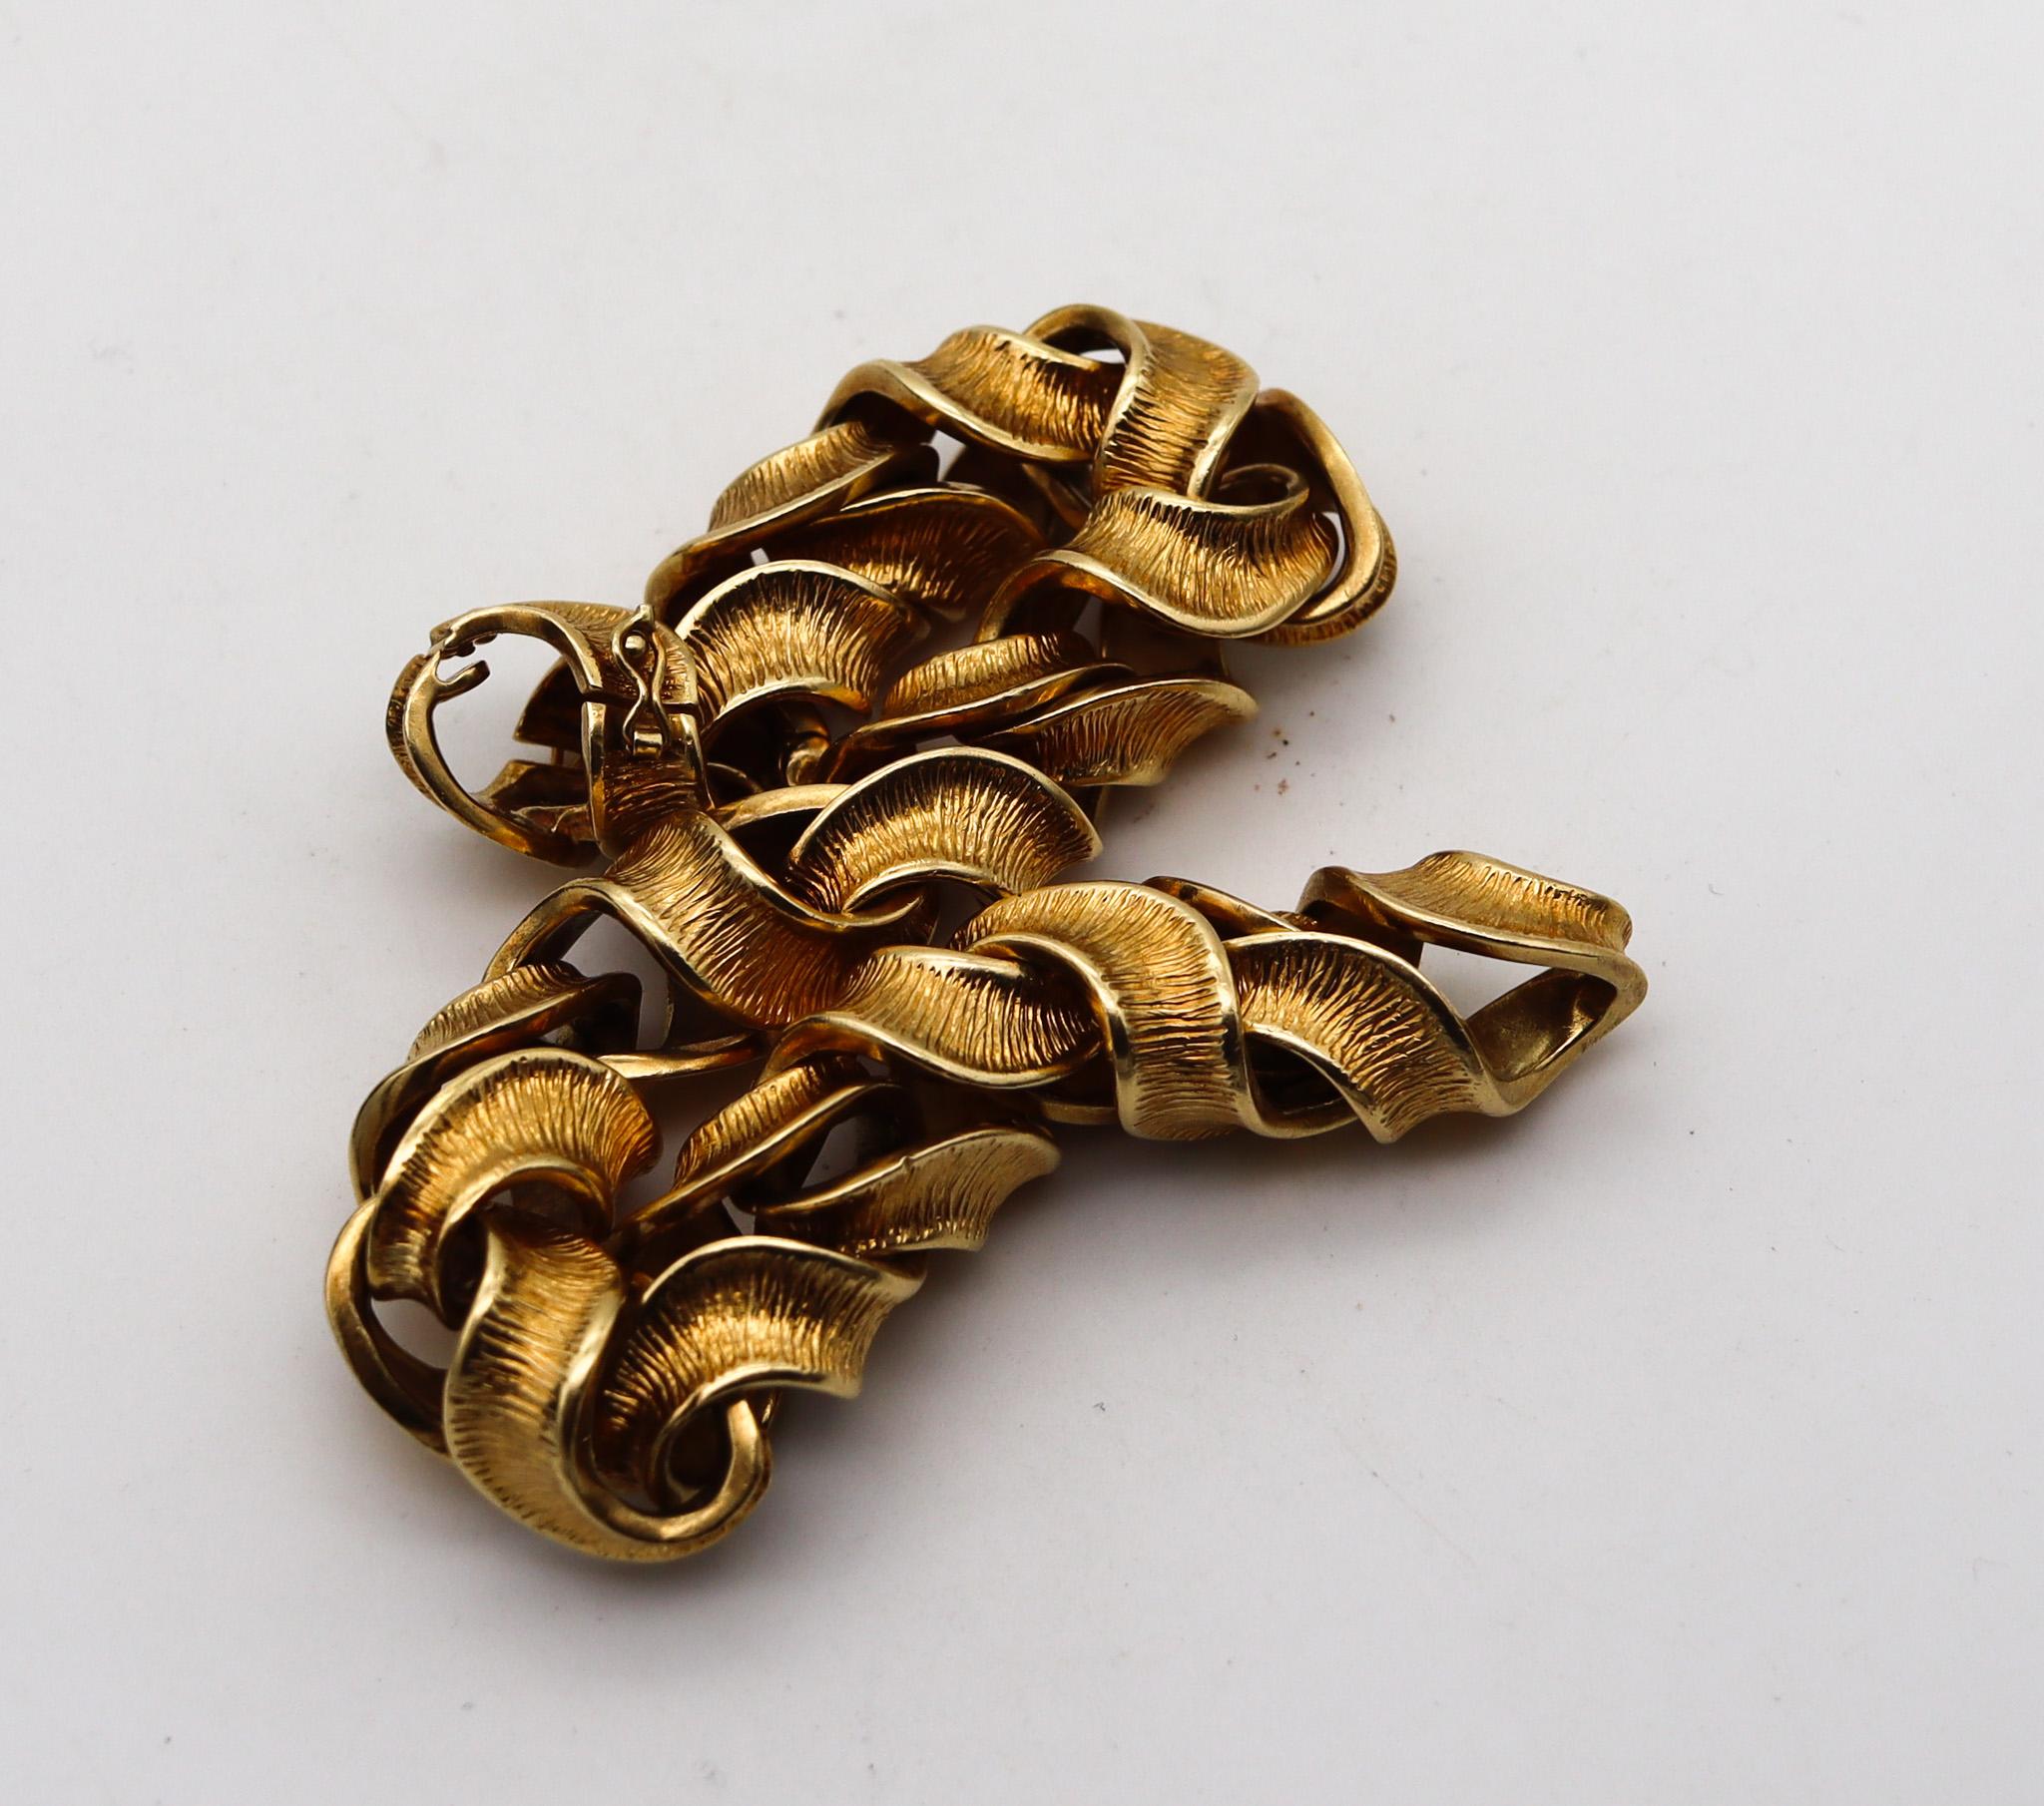 Riccardo Masella 1960 Modernist Twisted Bracelet In Solid 18Kt Yellow Gold For Sale 2